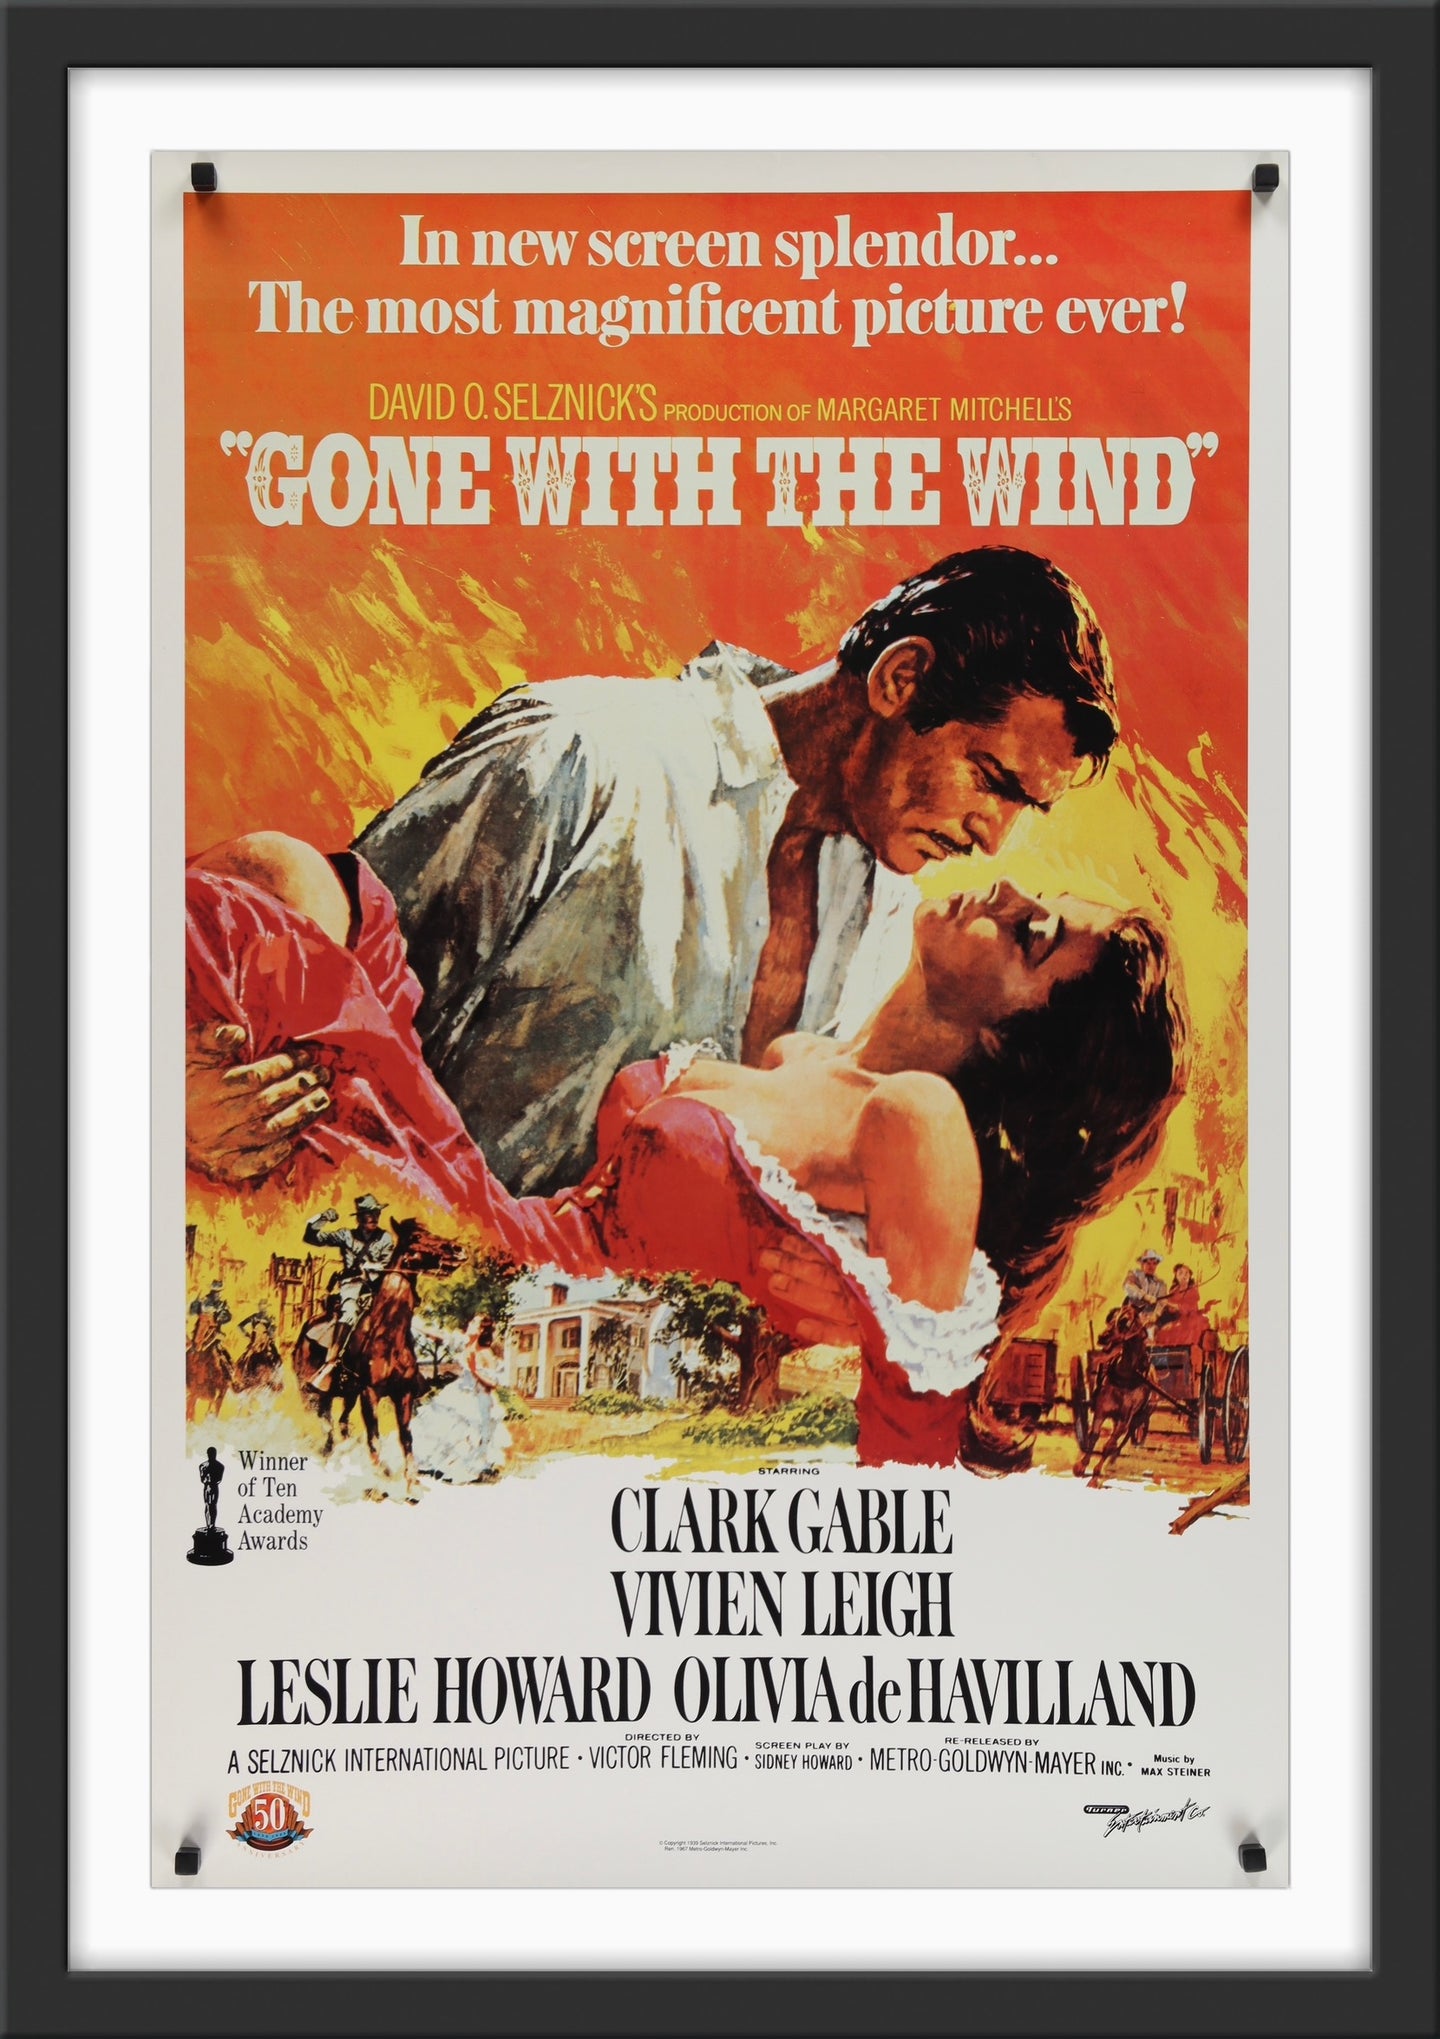 An original movie poster for the 50th anniversary release of Gone With The Wind